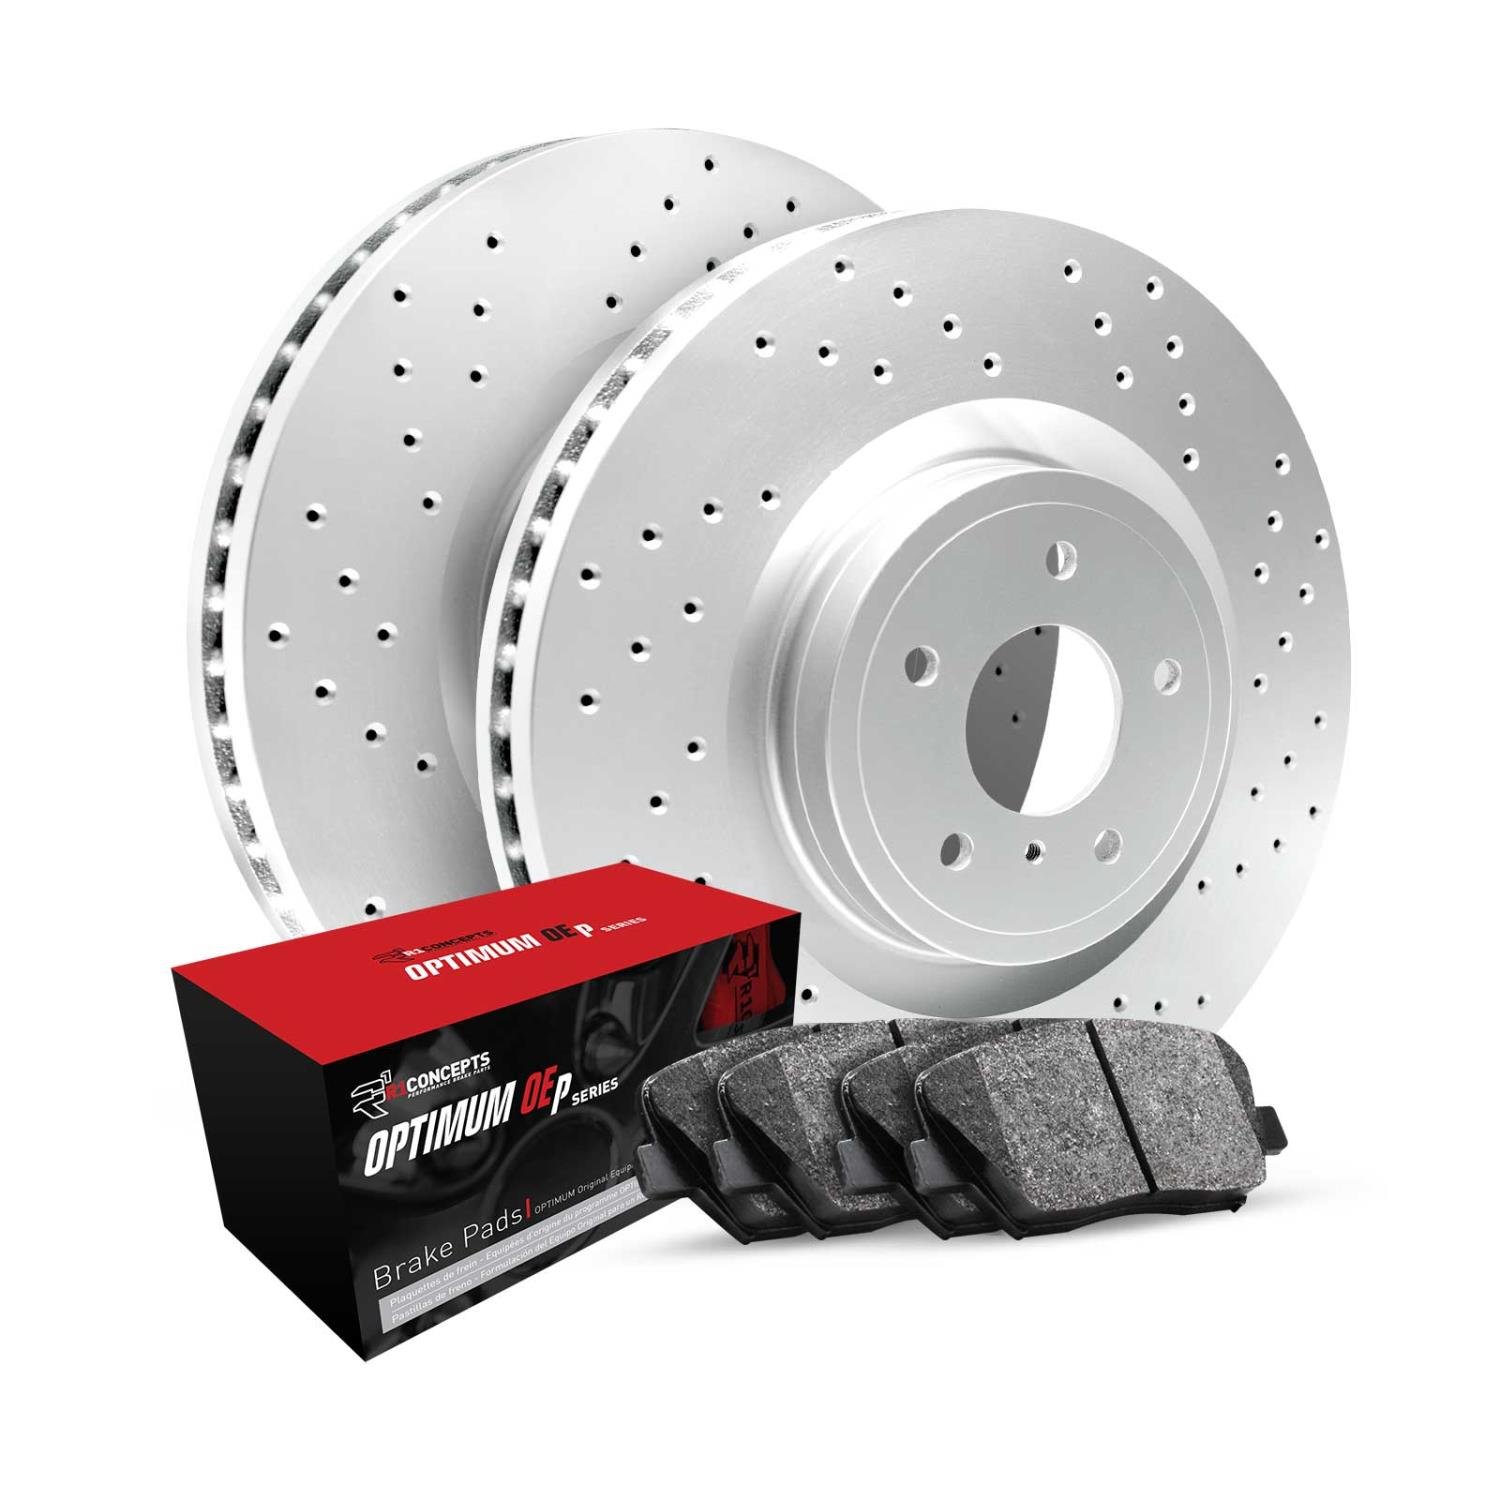 GEO-Carbon Drilled Brake Rotor Set w/Optimum OE Pads, 2003-2008 Fits Multiple Makes/Models, Position: Rear